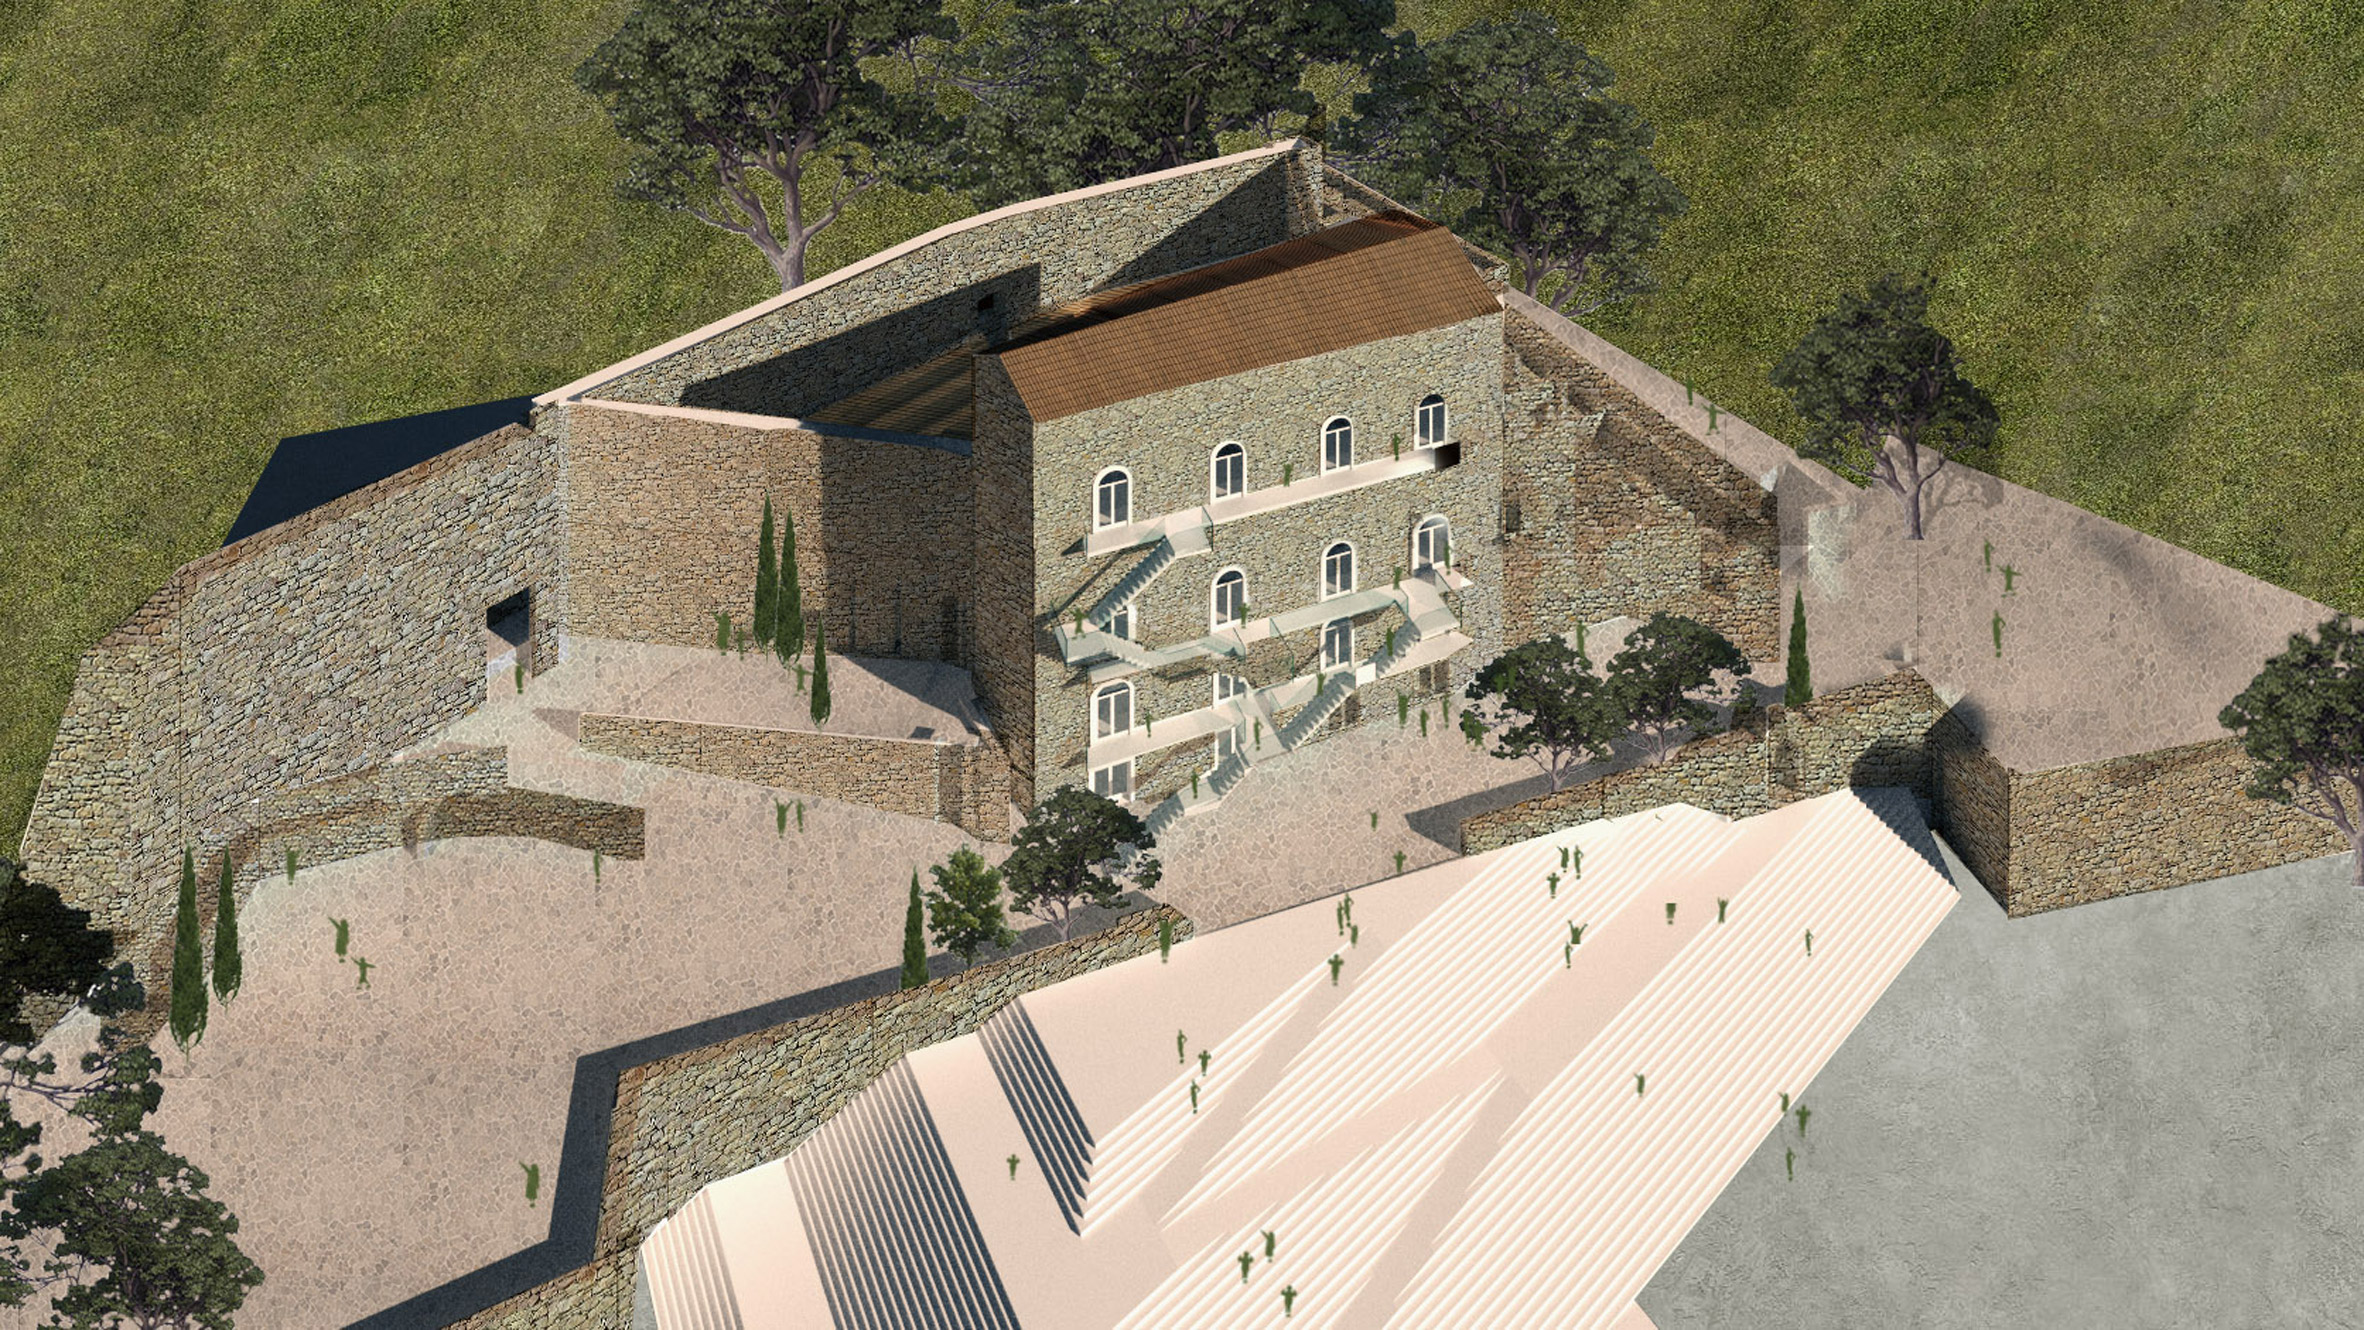 Visualisation showing aerial view of an old castle with a contemporary walkway in front of it